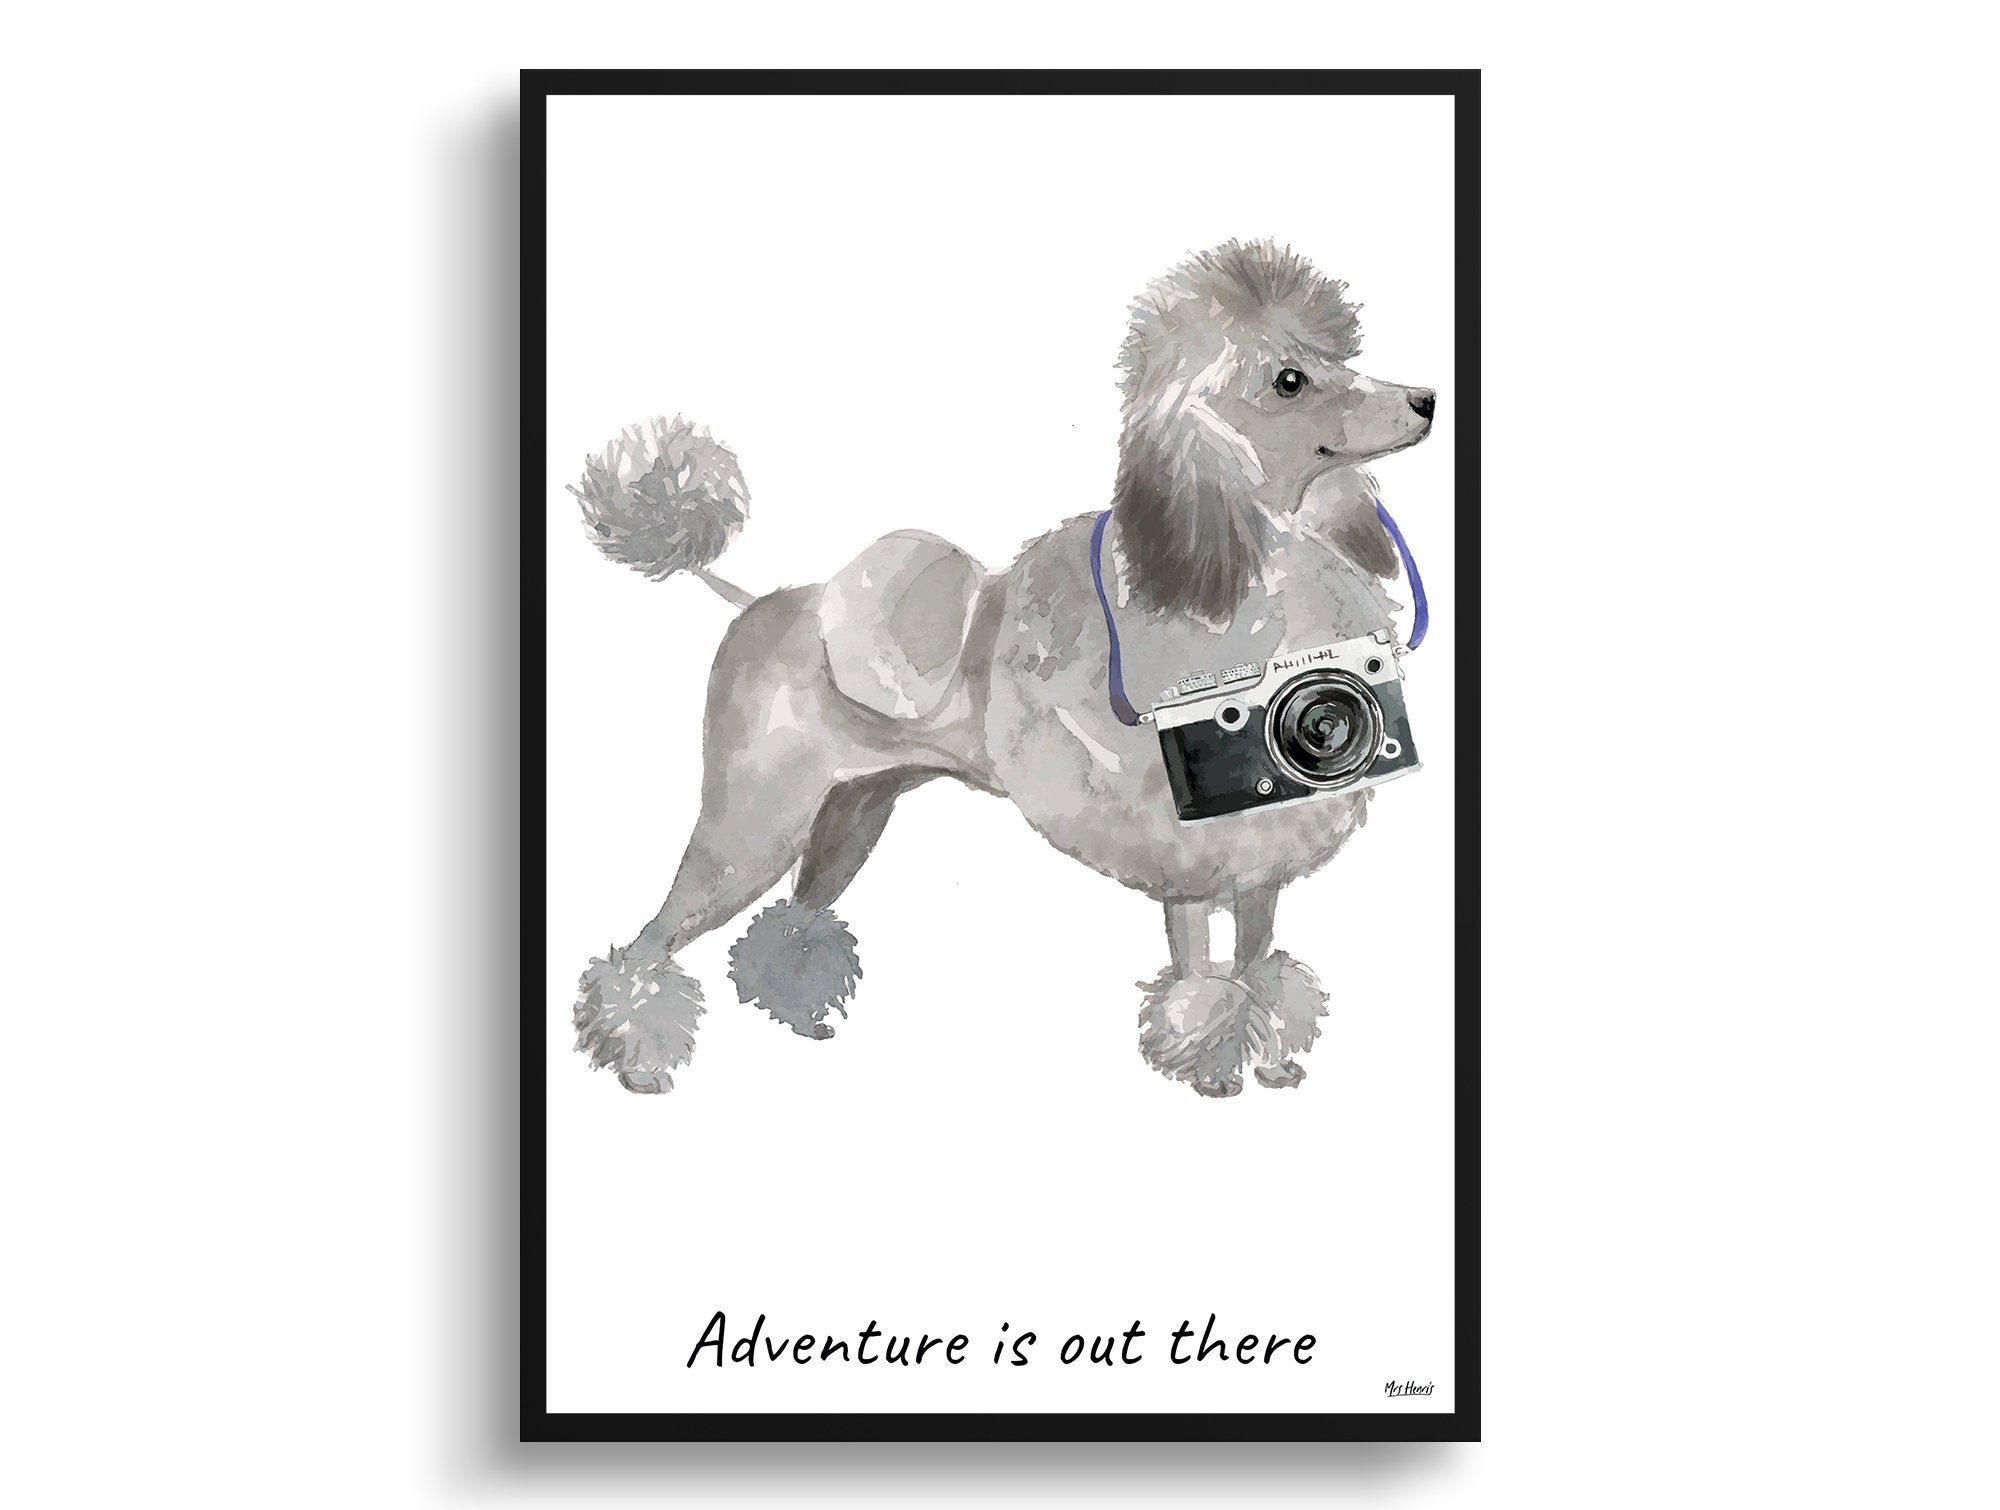 Adventure Is Out There Grey Poodle Dog Print Illustration. Framed & Un-Framed Wall Art Options. Personalised Name